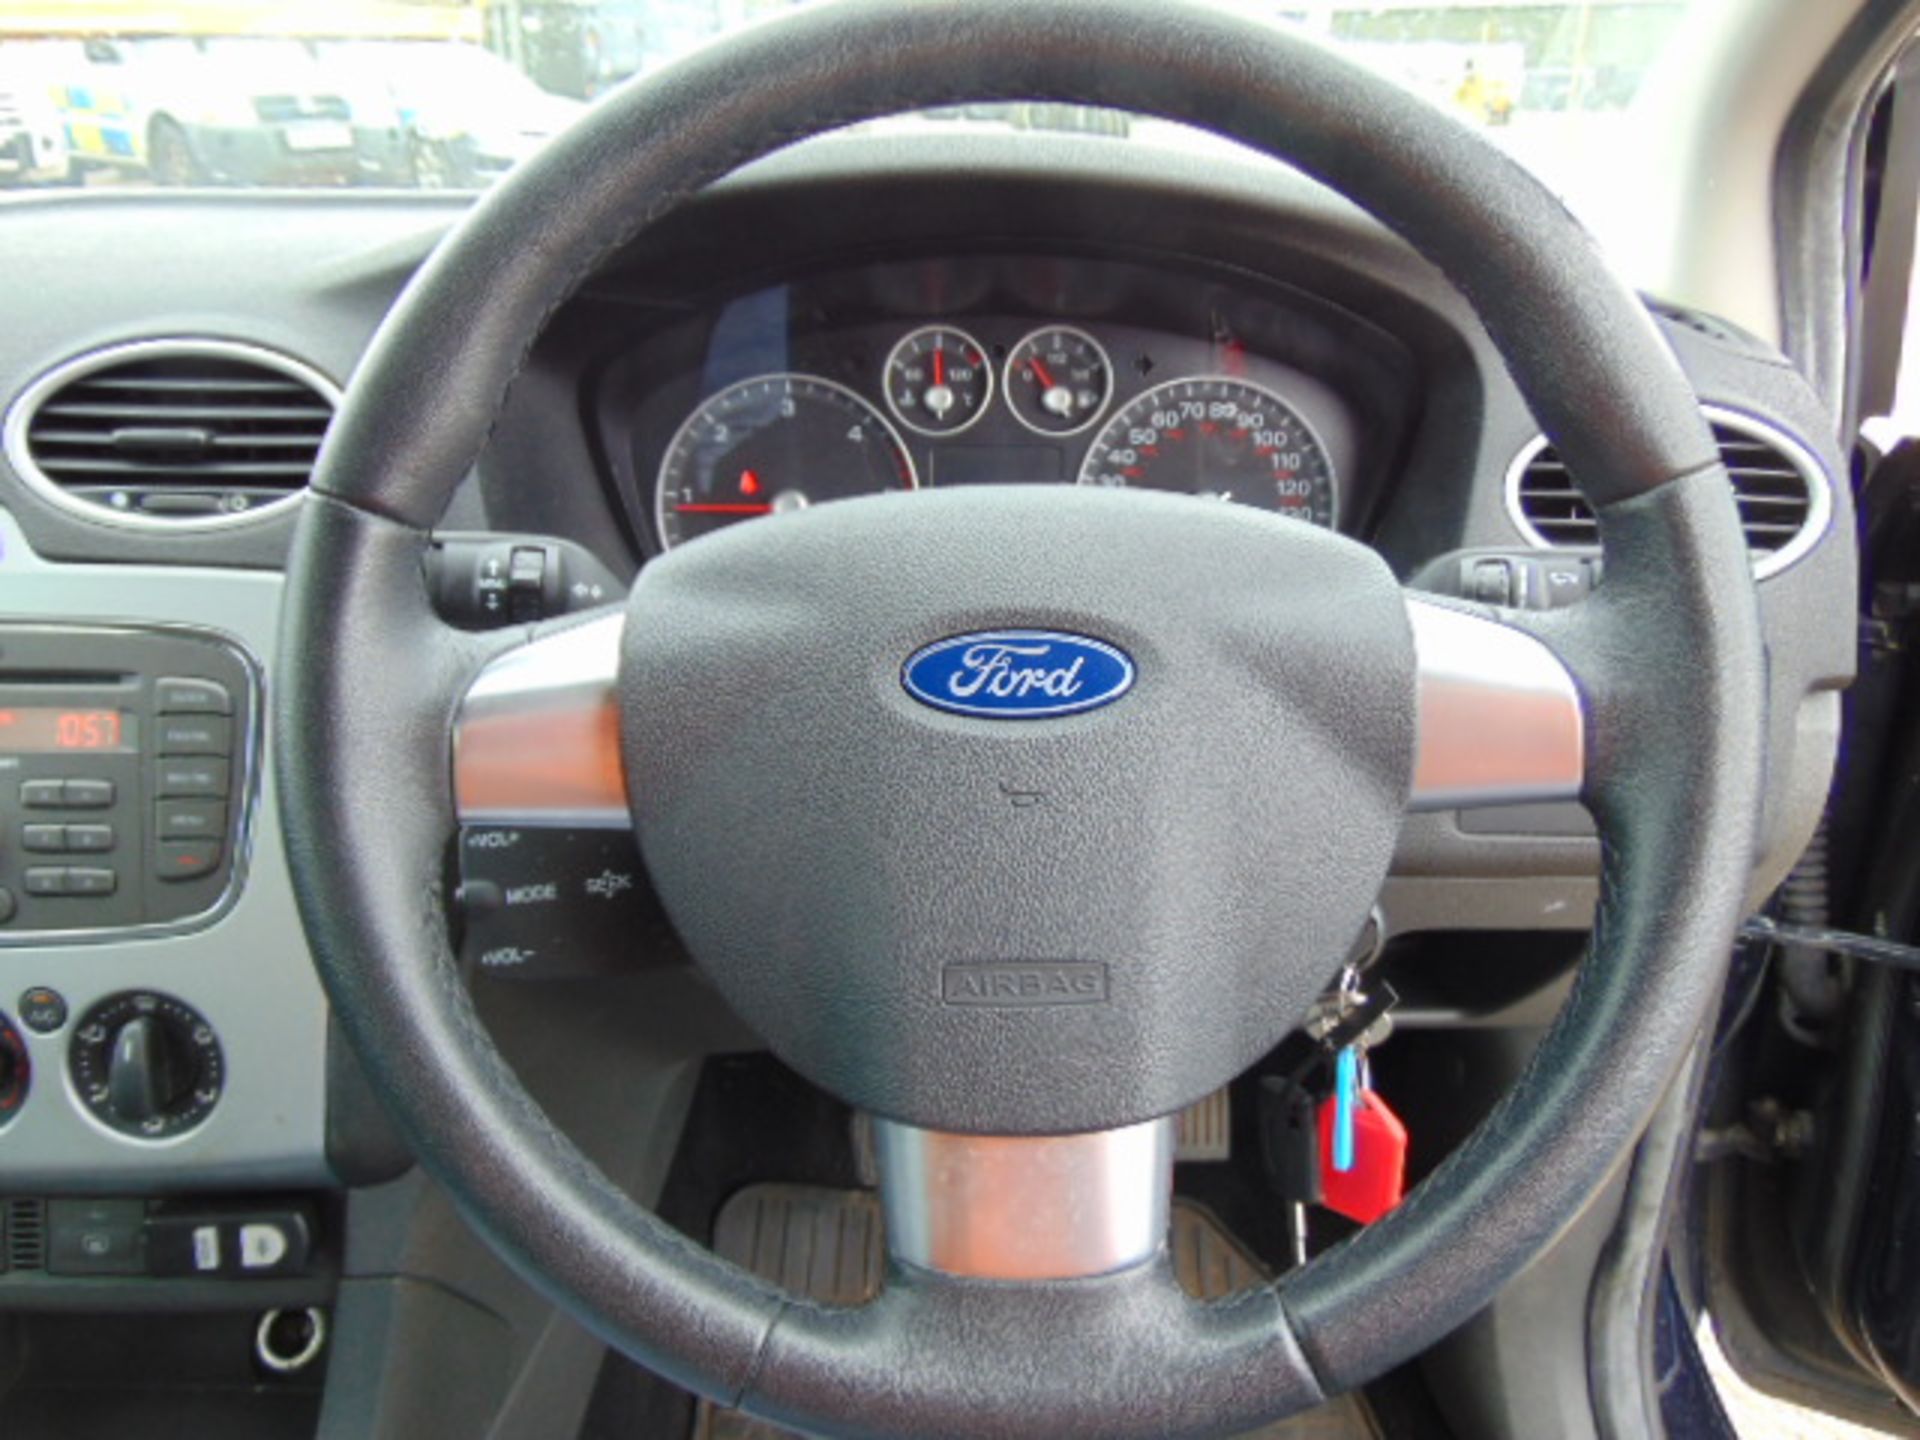 2008 Ford Focus 1.8 TDCI Style Hatchback - Image 11 of 18